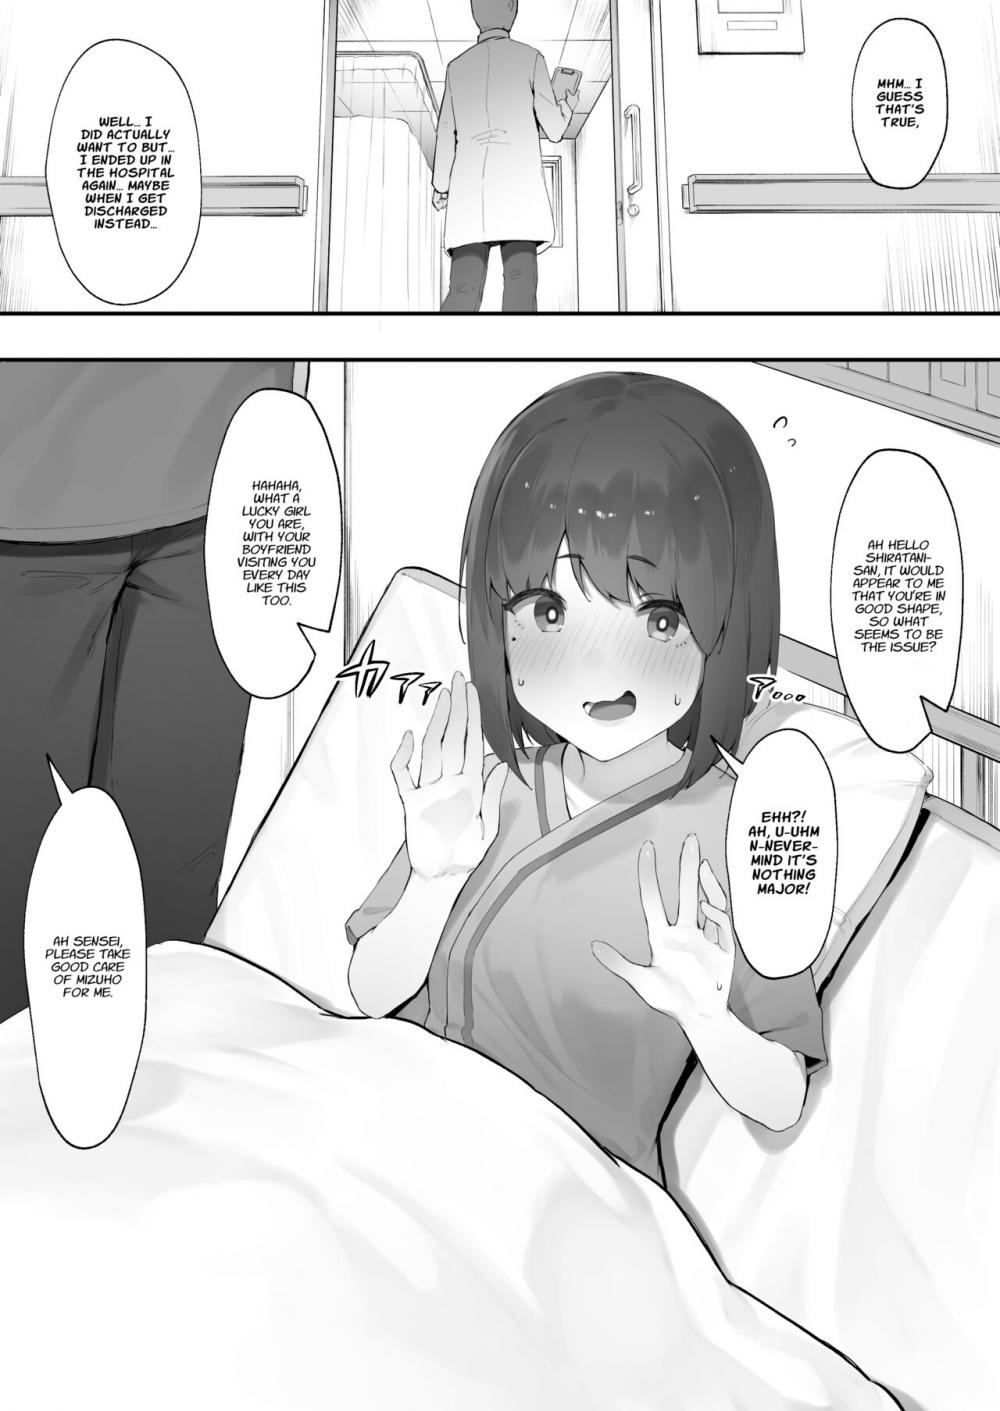 Hentai Manga Comic-Mental Health Care for Patients-Read-1